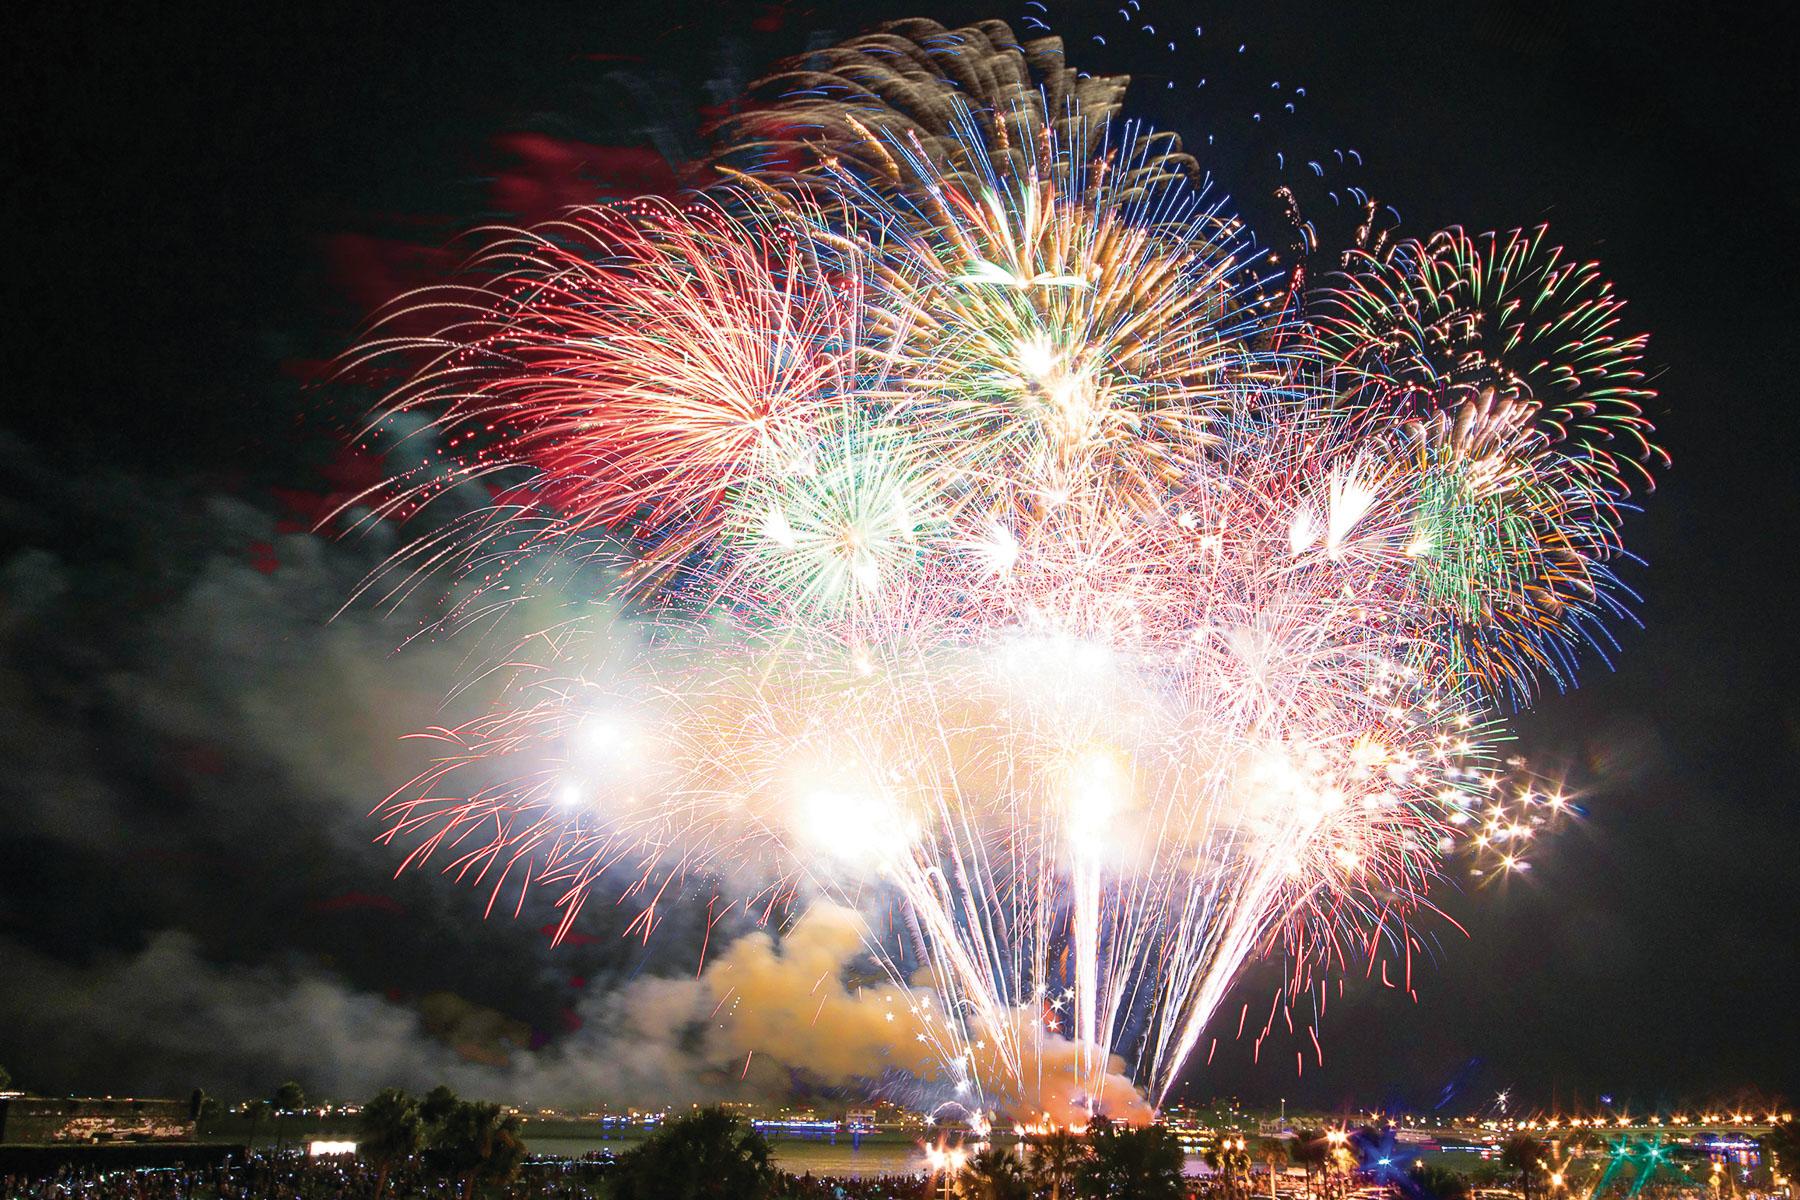 America's Best Small-Town Fourth of July Celebrations and Fireworks